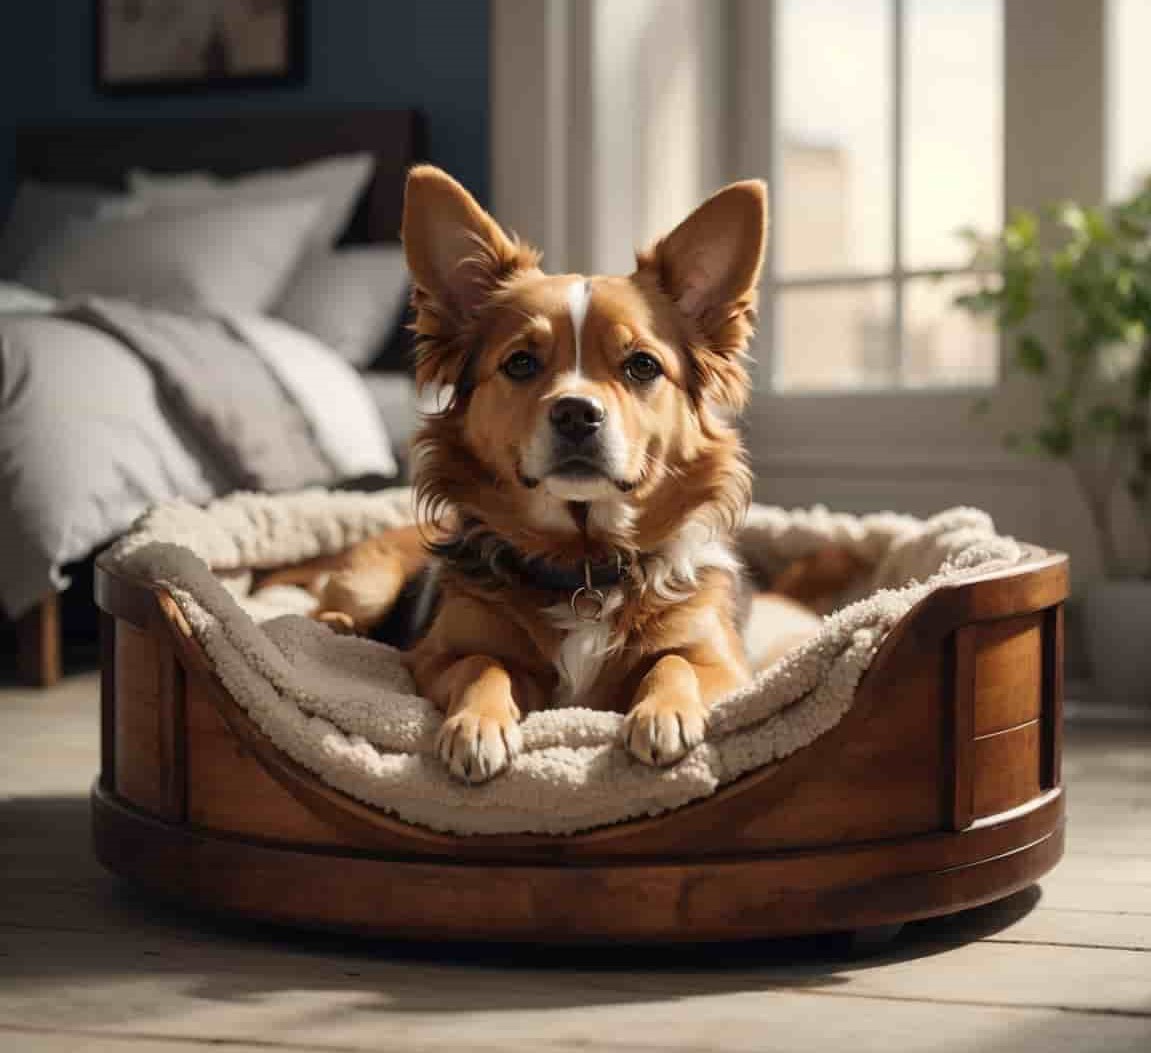 An adorable dog sitting in its bed